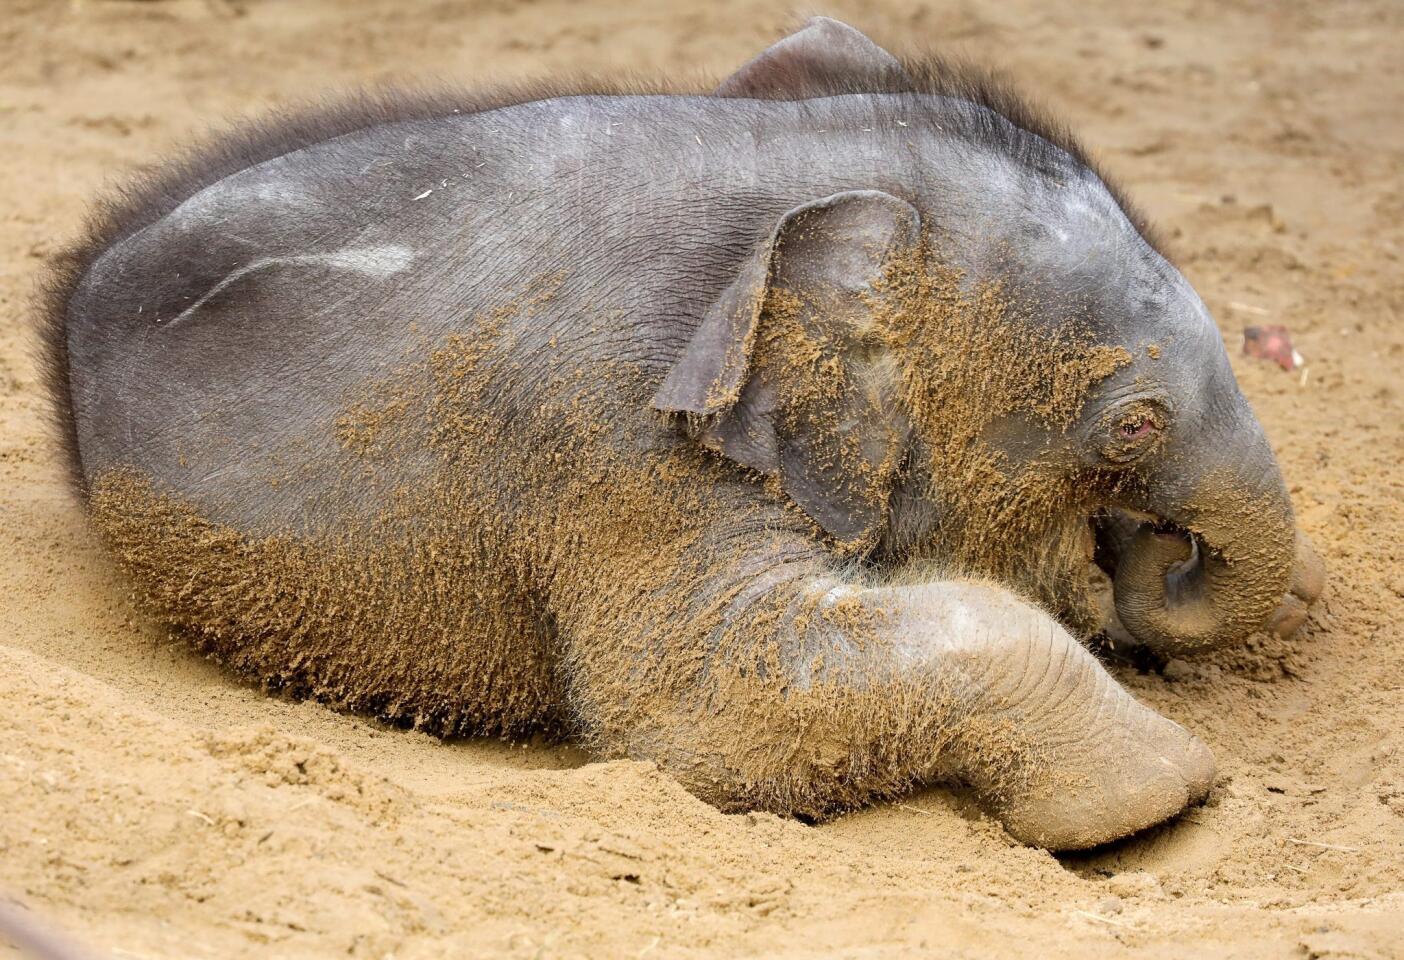 A baby elephant plays in the sand at the zoo in Hanover, Germany, on Jan. 25, 2017.